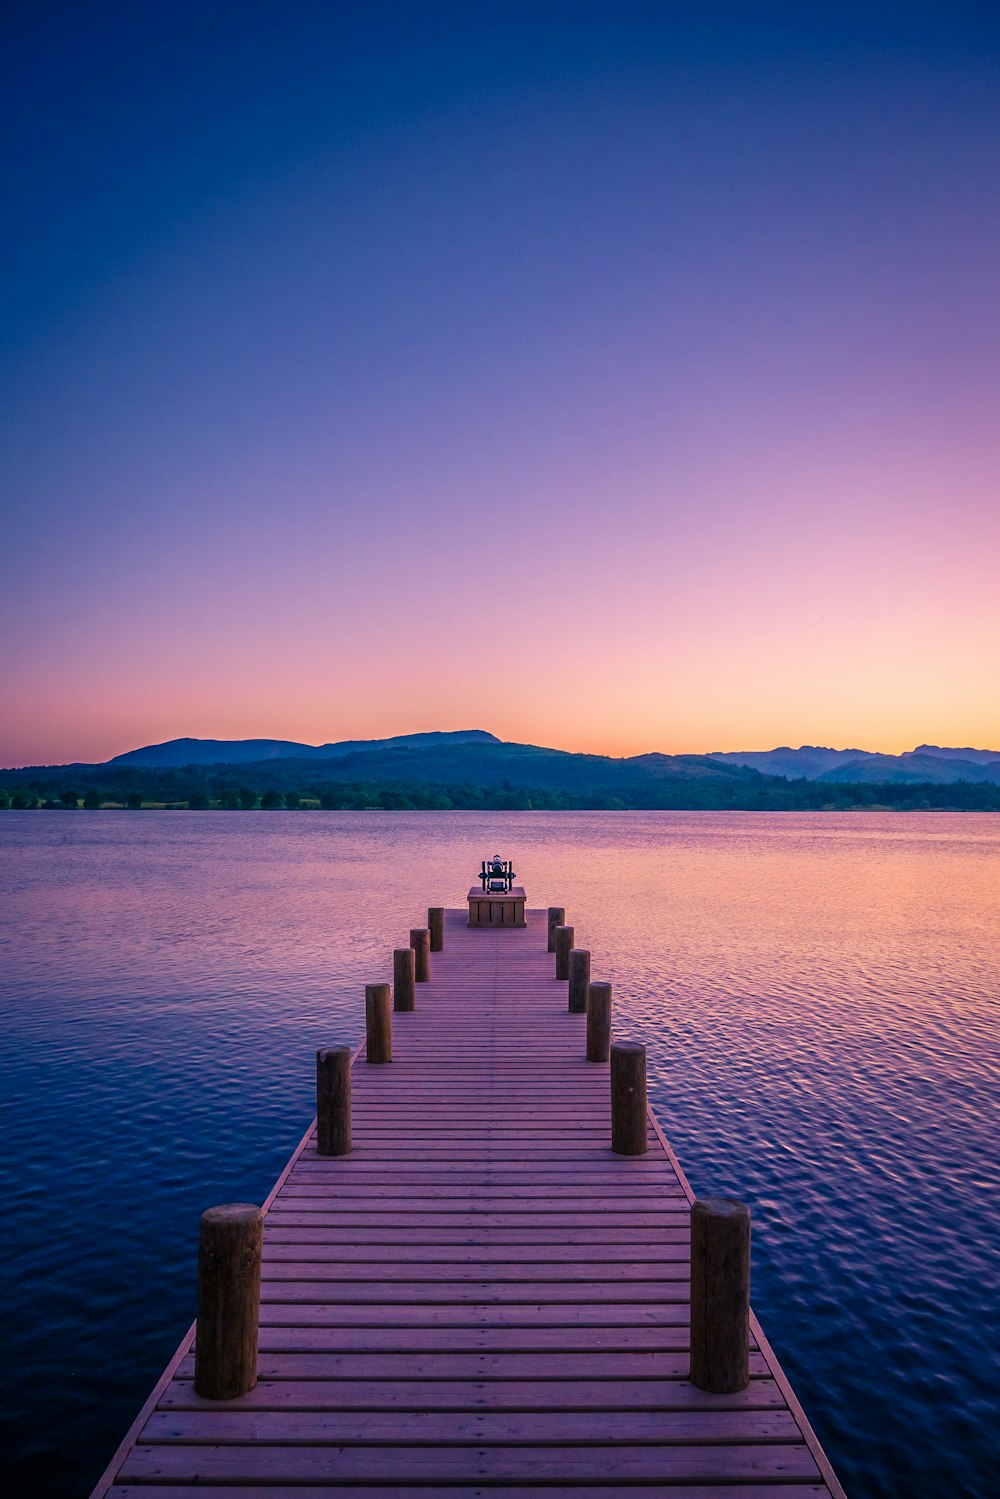 brown wooden dock on body of water during sunset